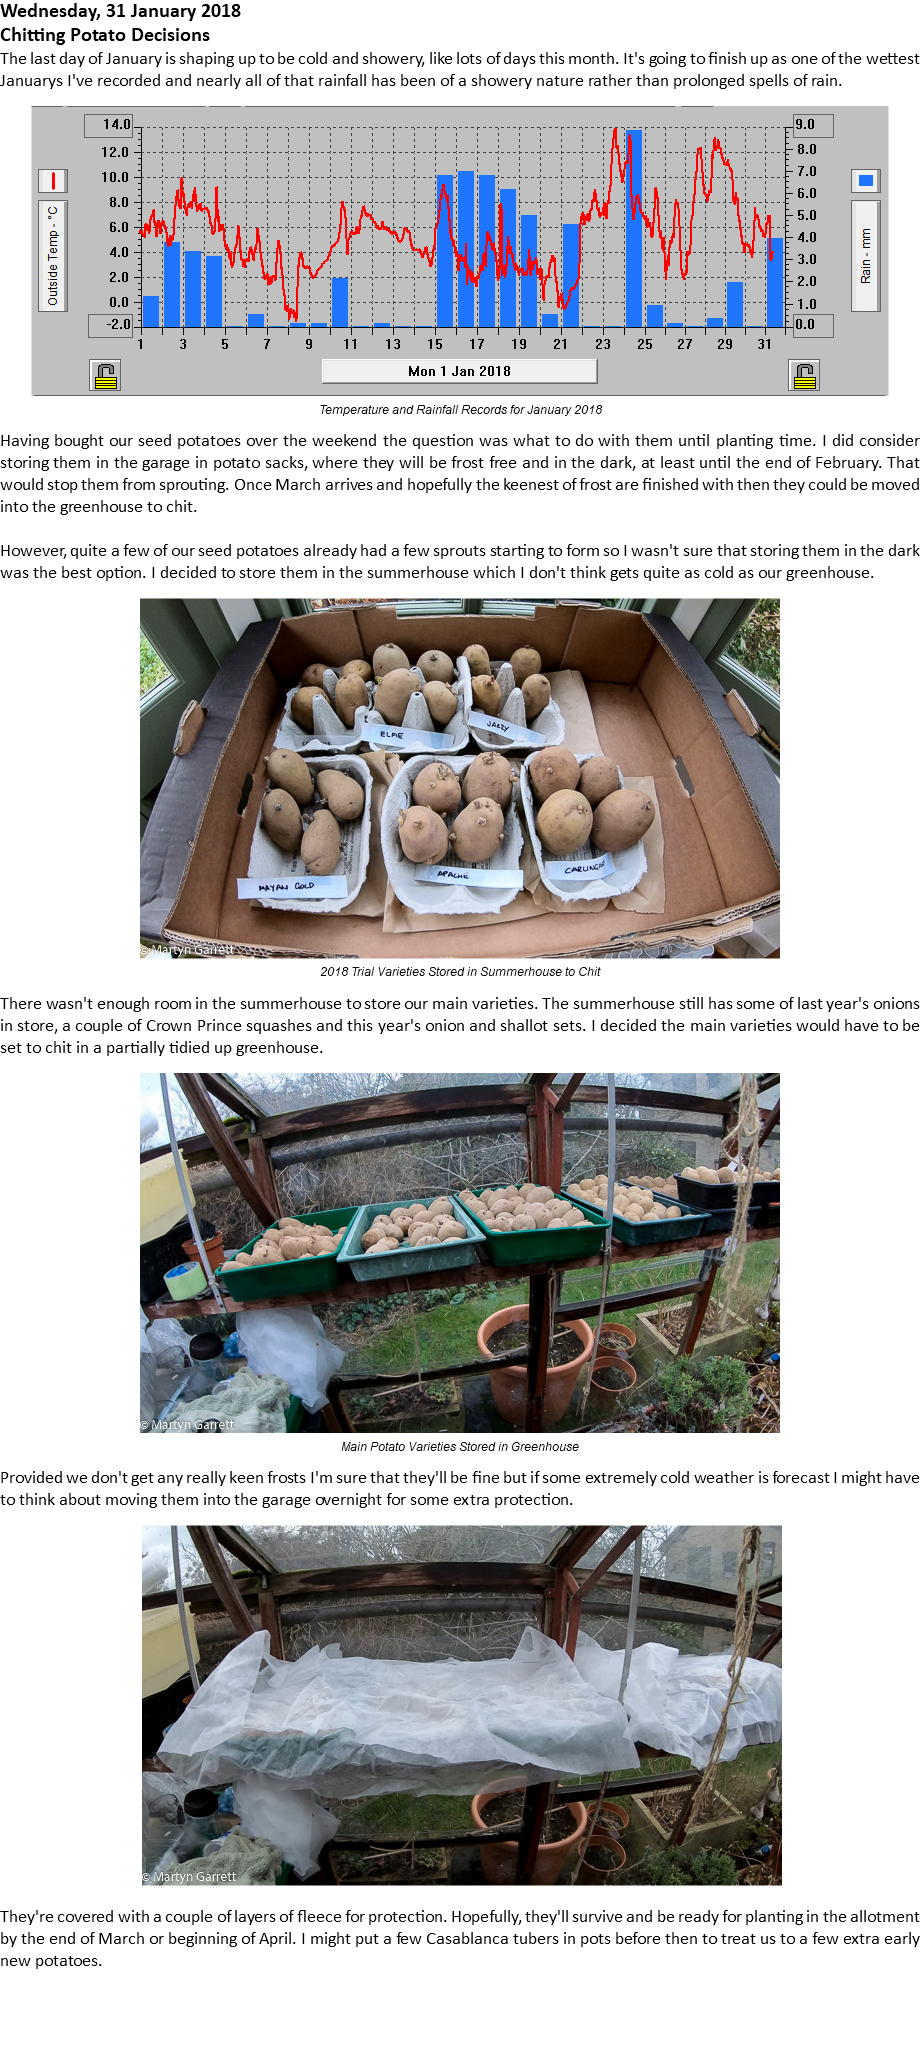 Wednesday, 31 January 2018 Chitting Potato Decisions The last day of January is shaping up to be cold and showery, like lots of days this month. It's going to finish up as one of the wettest Januarys I've recorded and nearly all of that rainfall has been of a showery nature rather than prolonged spells of rain. ﷯ Temperature and Rainfall Records for January 2018 Having bought our seed potatoes over the weekend the question was what to do with them until planting time. I did consider storing them in the garage in potato sacks, where they will be frost free and in the dark, at least until the end of February. That would stop them from sprouting. Once March arrives and hopefully the keenest of frost are finished with then they could be moved into the greenhouse to chit. However, quite a few of our seed potatoes already had a few sprouts starting to form so I wasn't sure that storing them in the dark was the best option. I decided to store them in the summerhouse which I don't think gets quite as cold as our greenhouse. ﷯ 2018 Trial Varieties Stored in Summerhouse to Chit There wasn't enough room in the summerhouse to store our main varieties. The summerhouse still has some of last year's onions in store, a couple of Crown Prince squashes and this year's onion and shallot sets. I decided the main varieties would have to be set to chit in a partially tidied up greenhouse. ﷯ Main Potato Varieties Stored in Greenhouse Provided we don't get any really keen frosts I'm sure that they'll be fine but if some extremely cold weather is forecast I might have to think about moving them into the garage overnight for some extra protection. ﷯ They're covered with a couple of layers of fleece for protection. Hopefully, they'll survive and be ready for planting in the allotment by the end of March or beginning of April. I might put a few Casablanca tubers in pots before then to treat us to a few extra early new potatoes. 